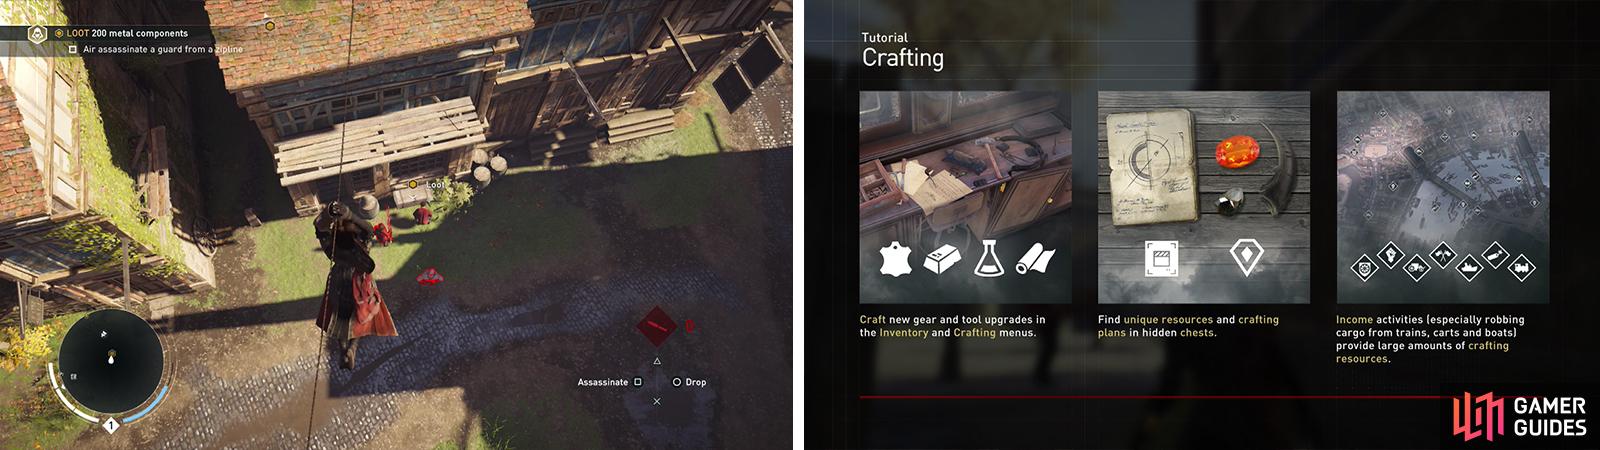 Be sure to air assassinate an enemy from the zip line (left). Use the crafting menu to upgrade the Smoke Bombs (right).